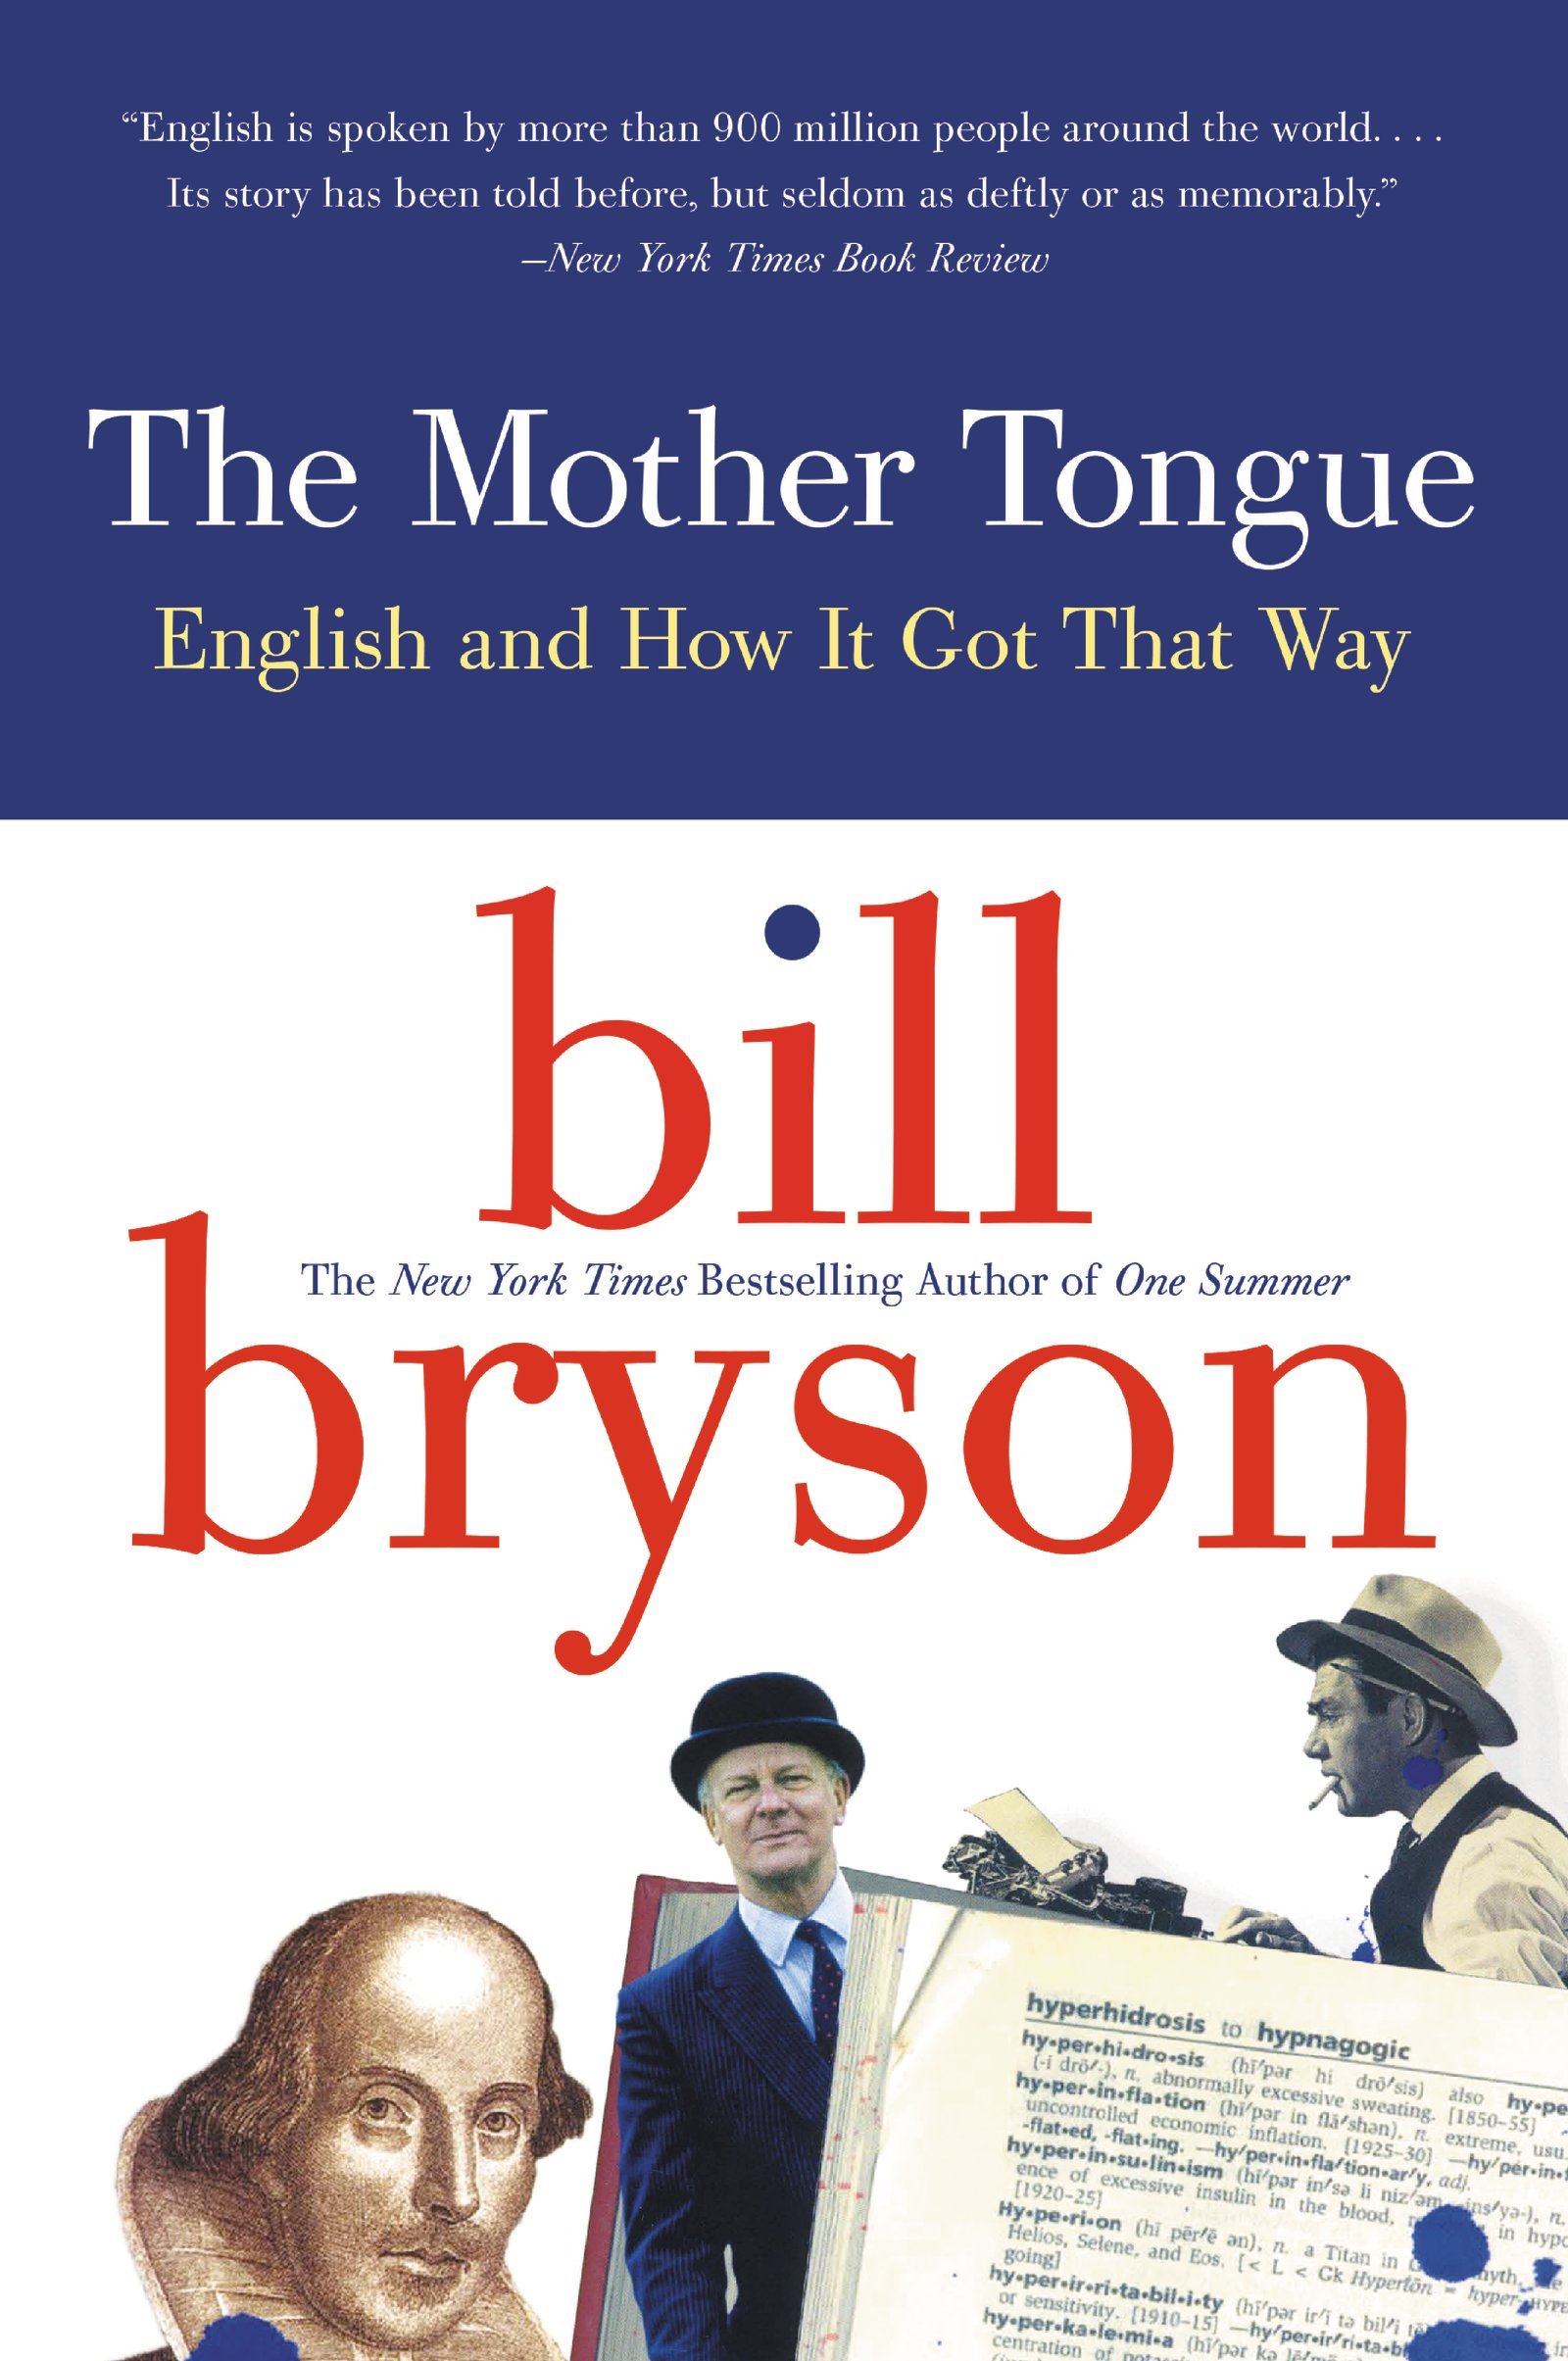 The Mother Tongue: English and How It Got This Way